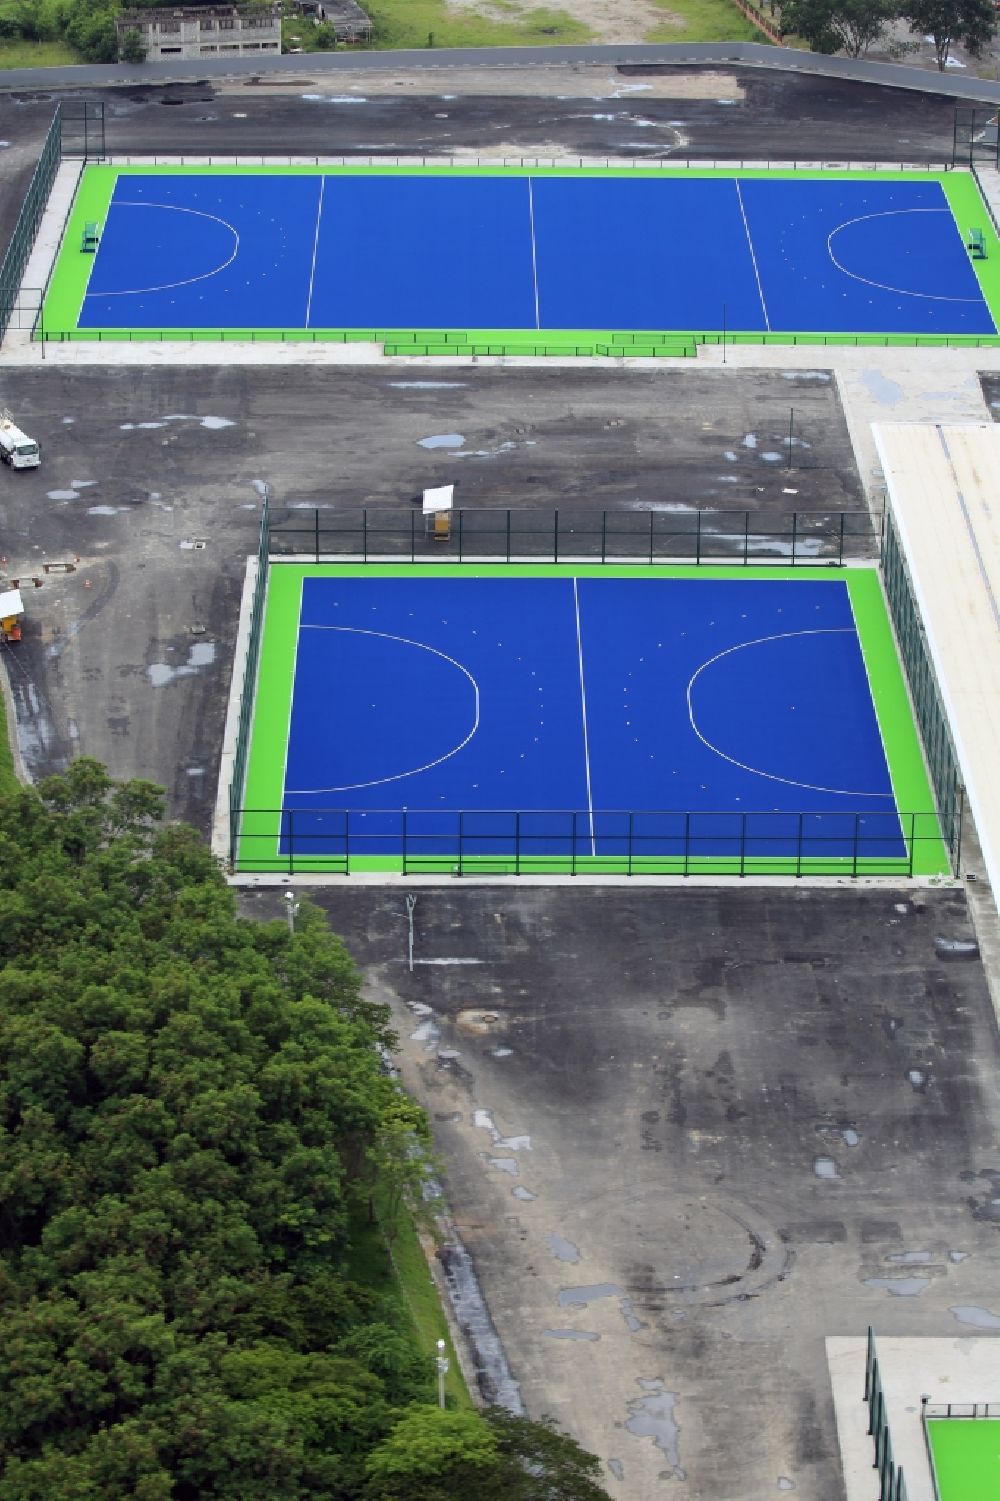 Aerial image Rio de Janeiro - Ensemble of the sports grounds of the hockey pitch before the Summer Games of the Games of the XXXI. Olympics in Rio de Janeiro in Rio de Janeiro, Brazil